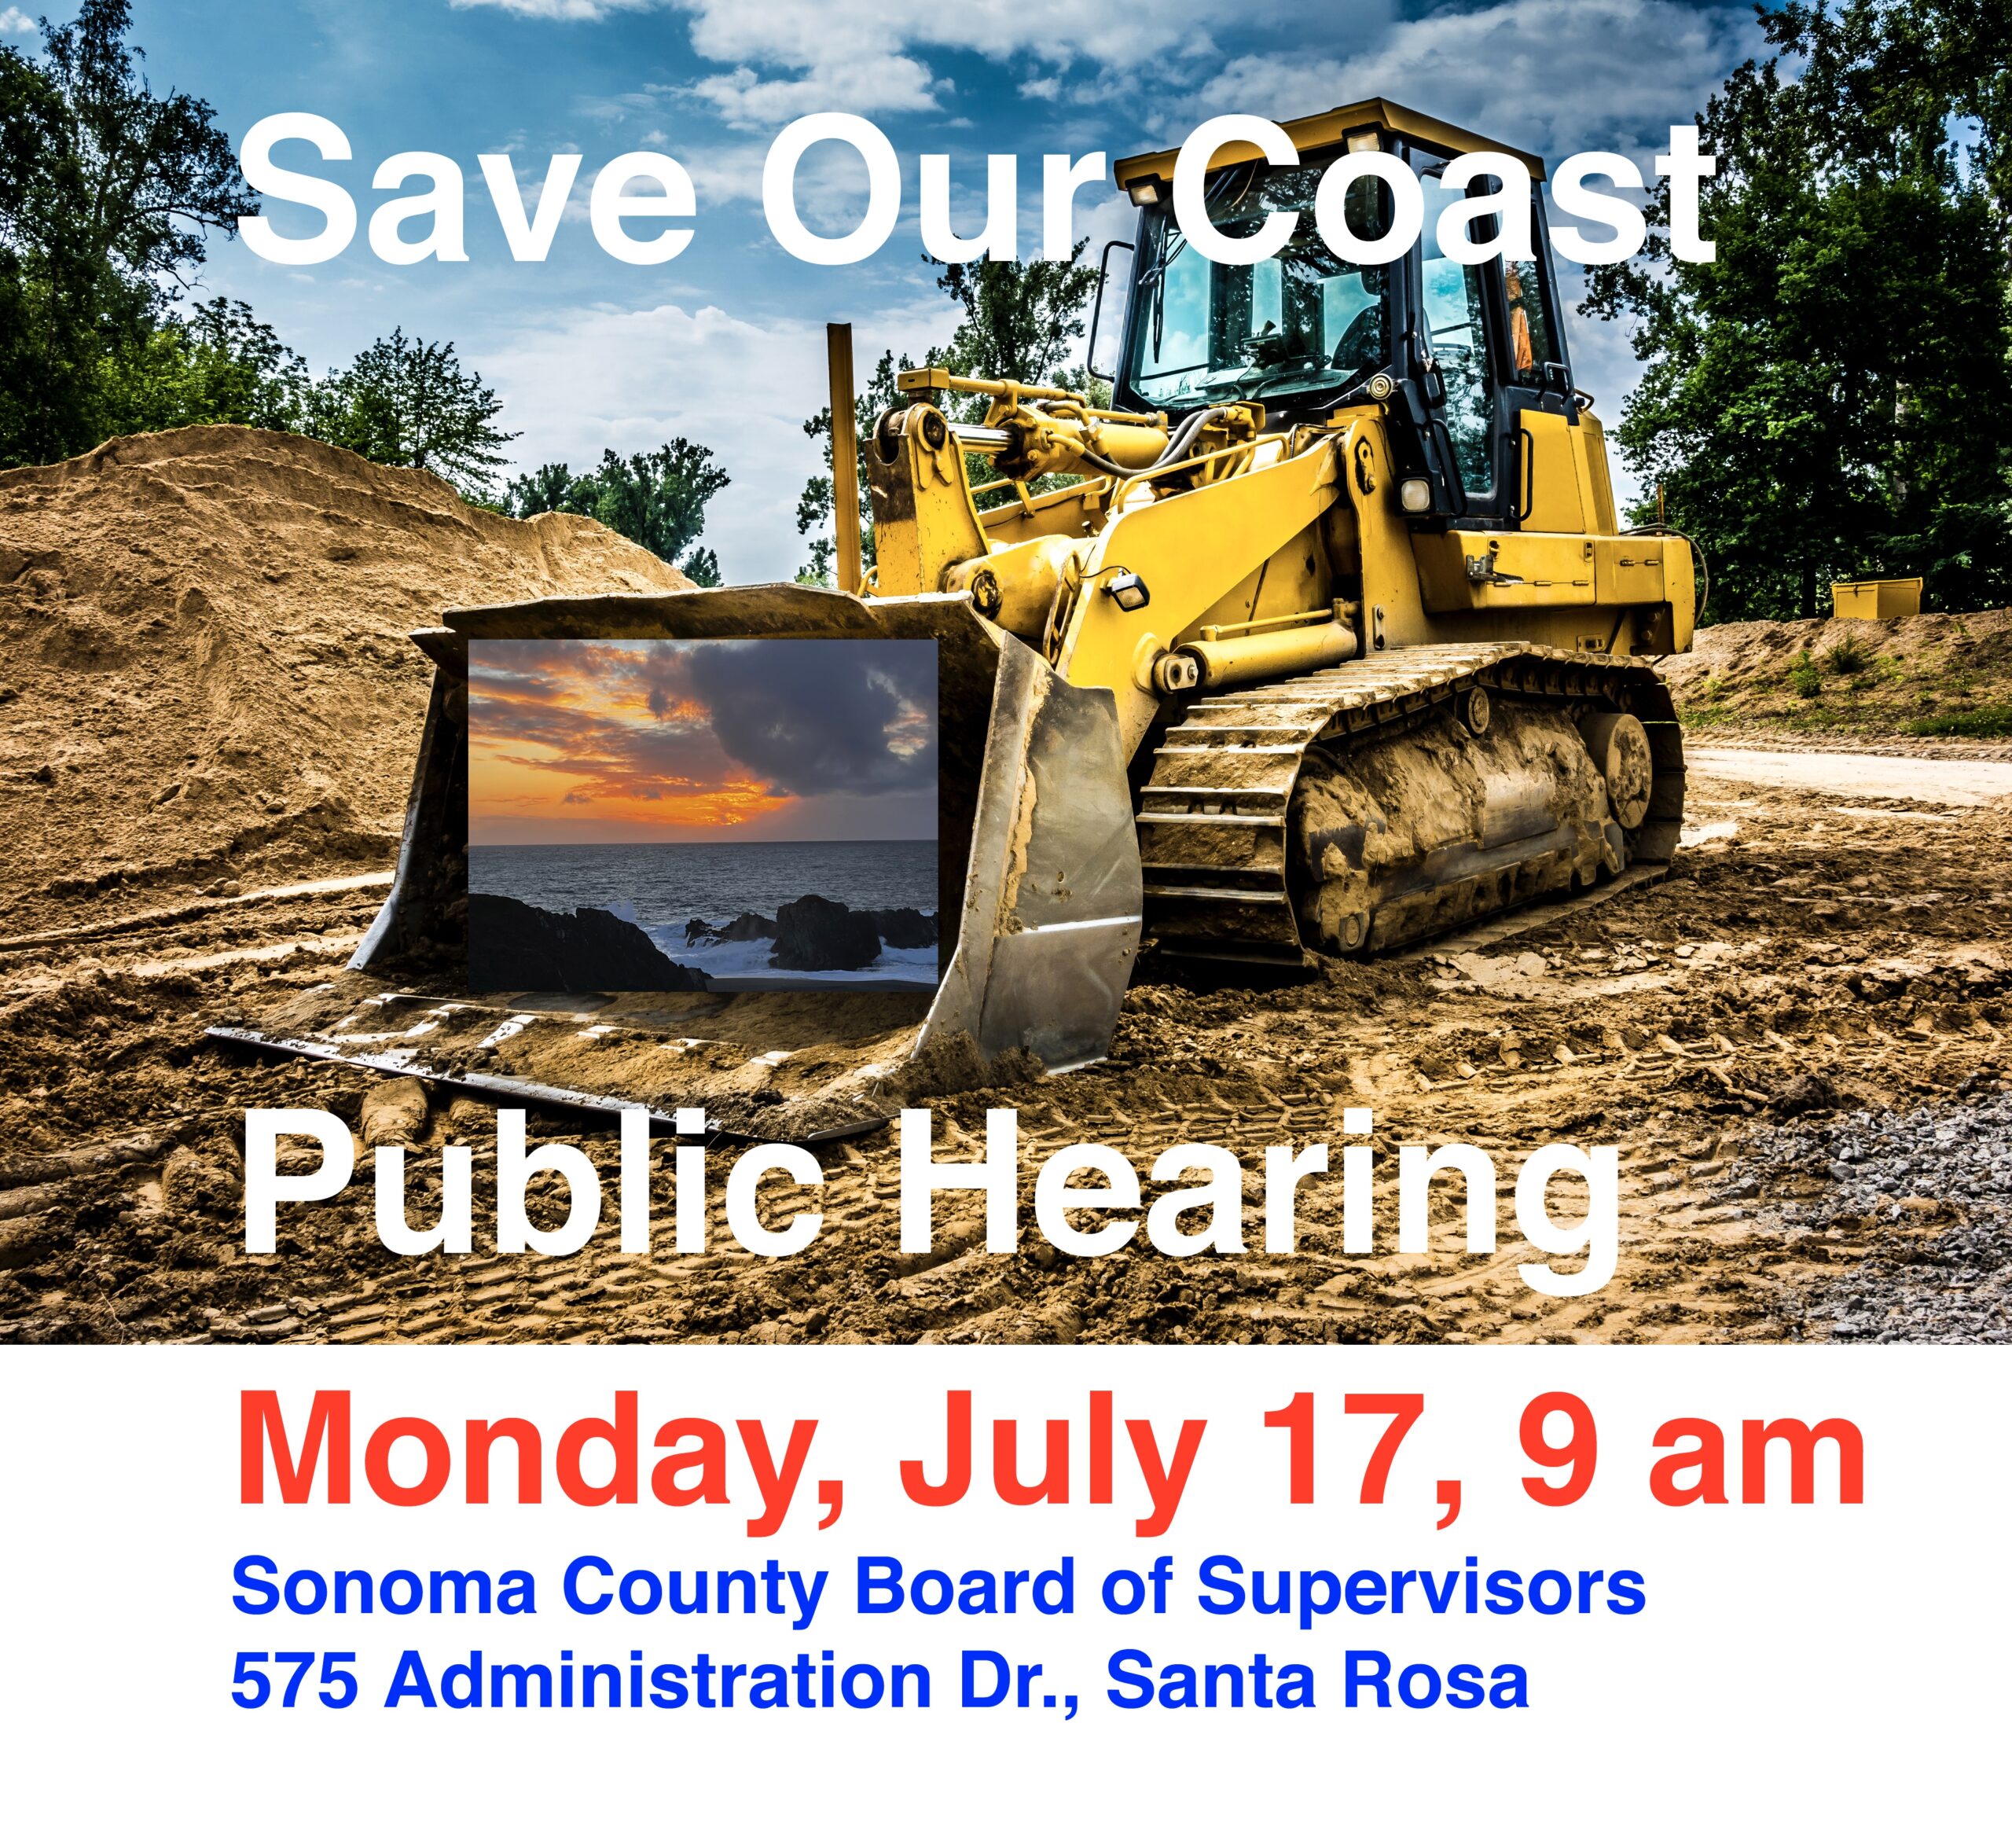 Save Our Coast Public Hearing - Monday, July 17, 9am